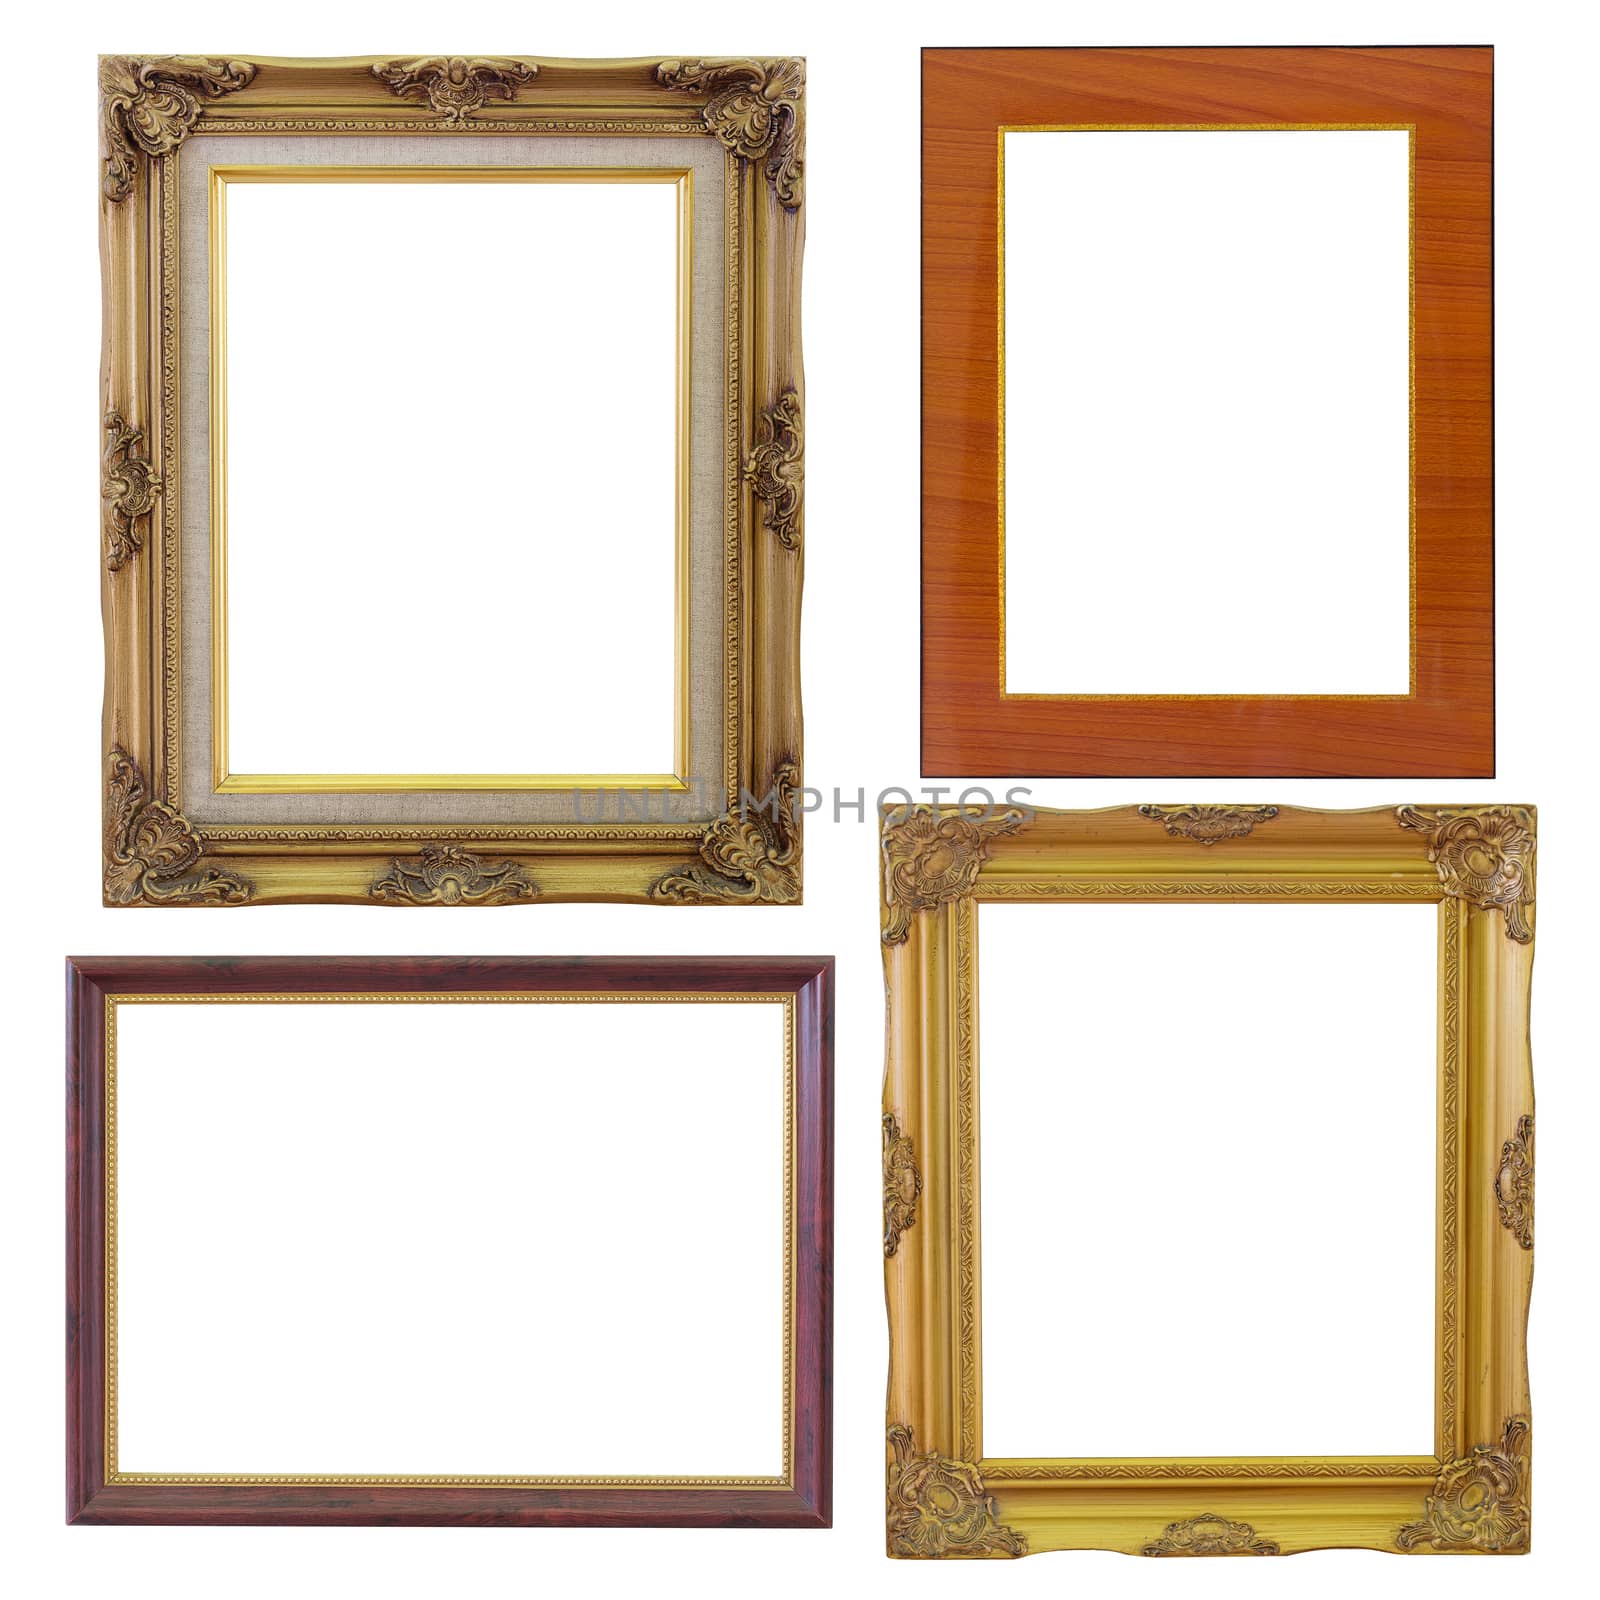 Set of golden frame and wood vintage isolated on white backgroun by jayzynism